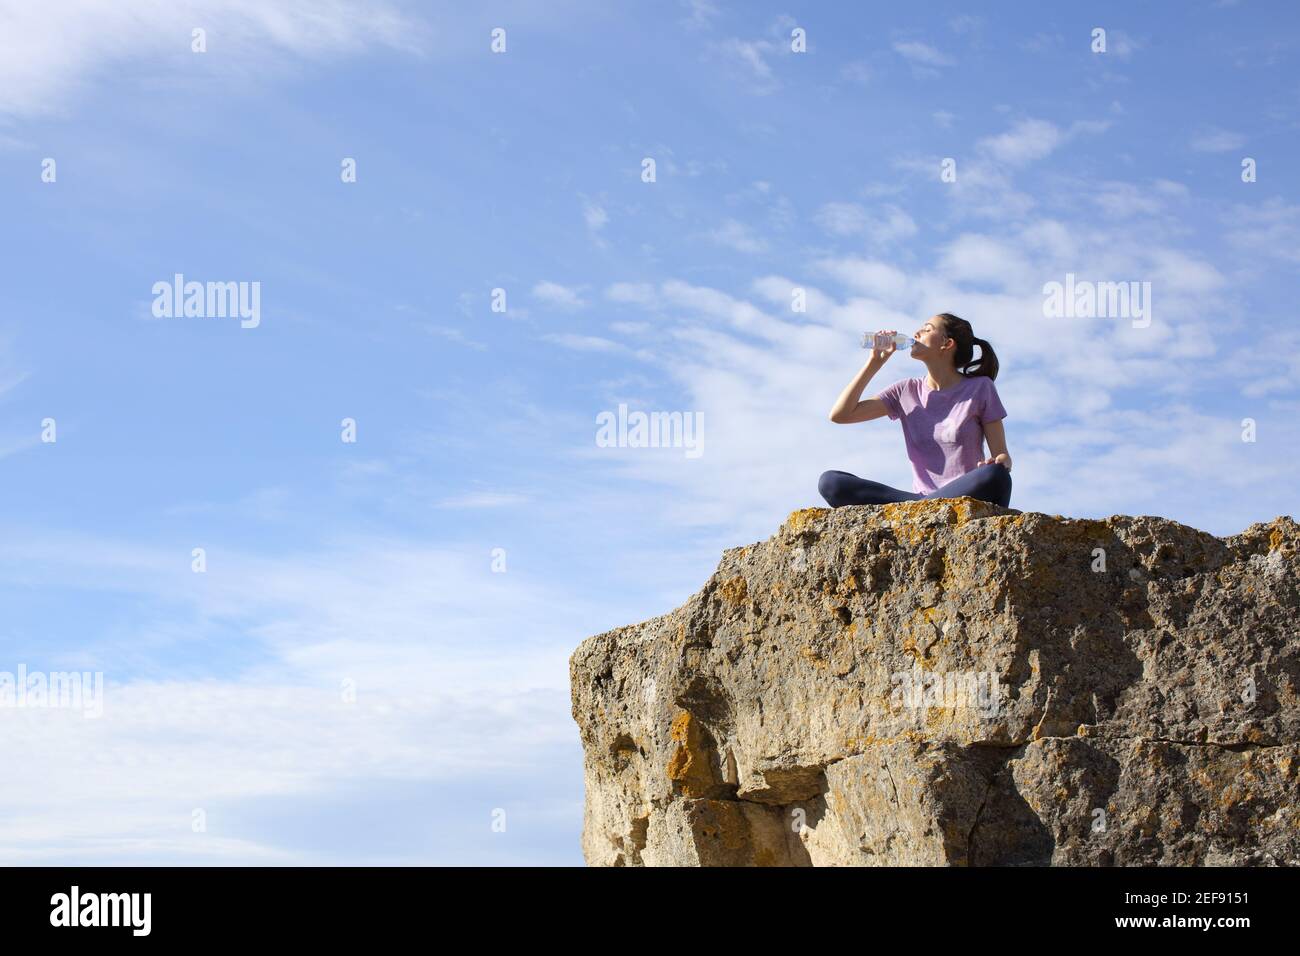 Yogi drinking water from plastic bottle after yoga exercises in the top of a cliff in the mountain Stock Photo